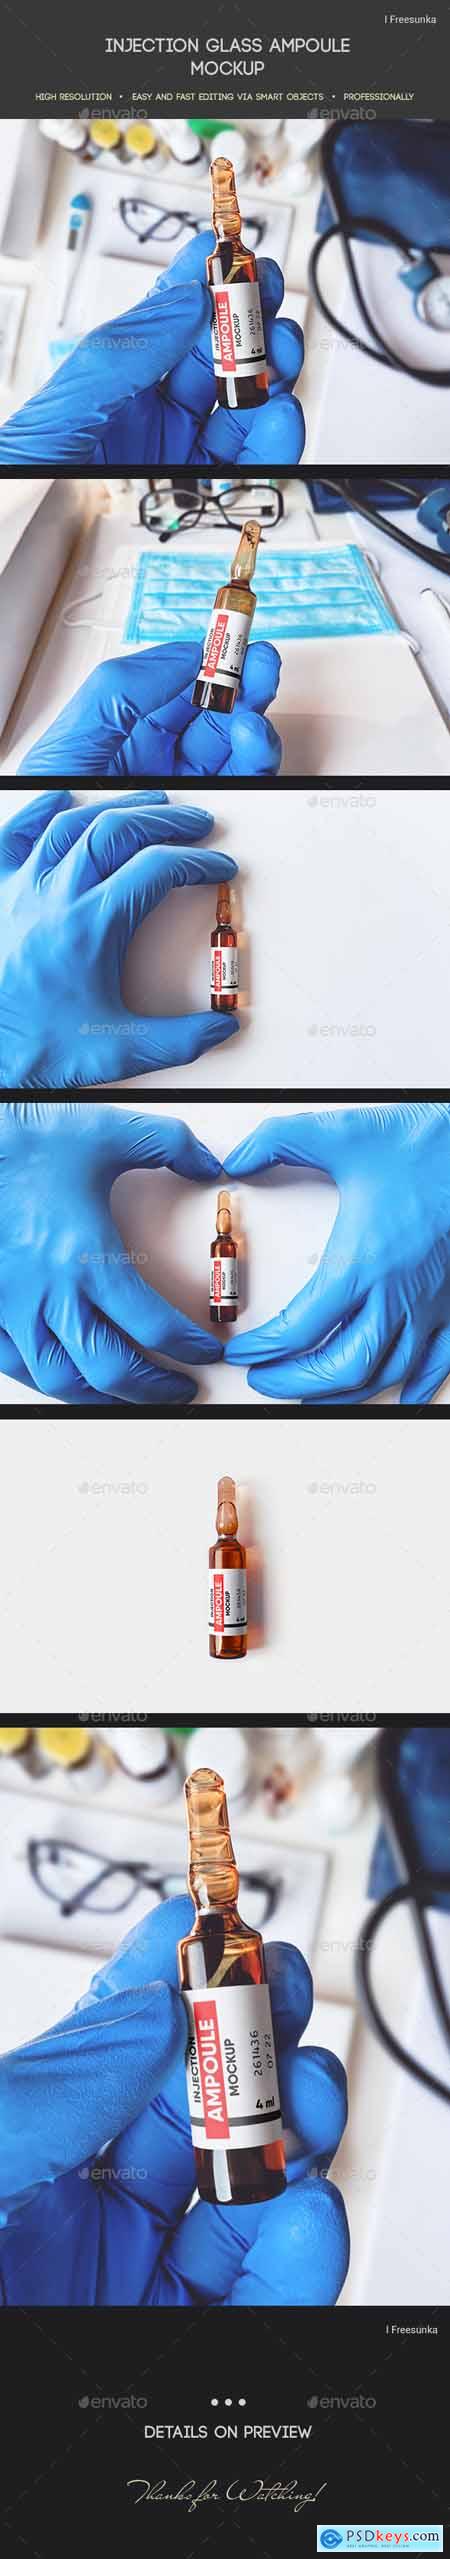 Injection Glass Ampoule Mockup 26238829